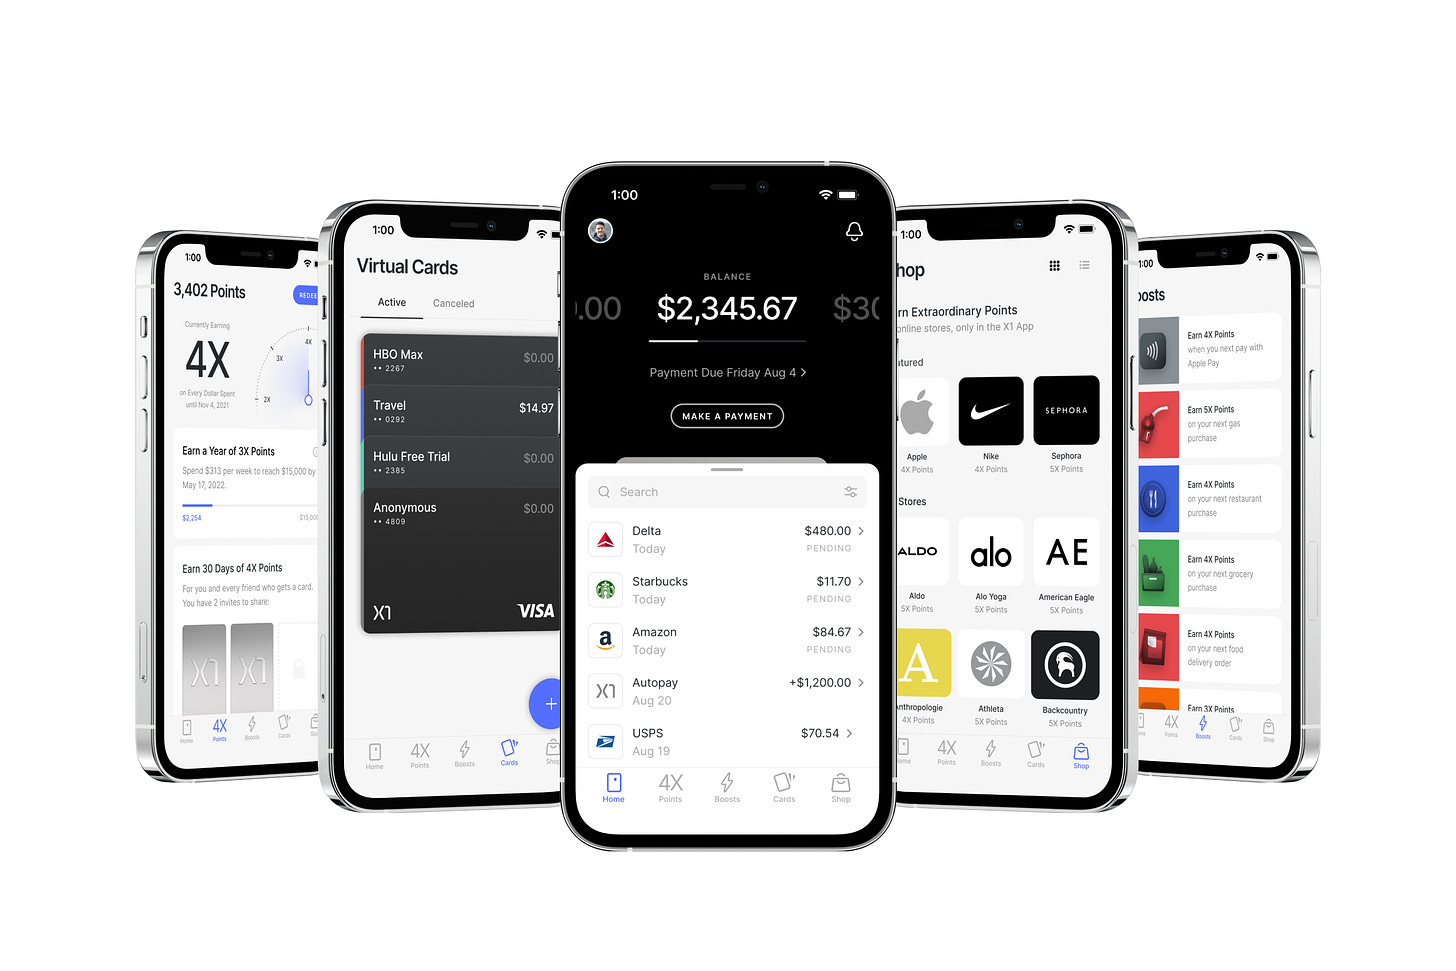 The mobile interface for X1's credit card app